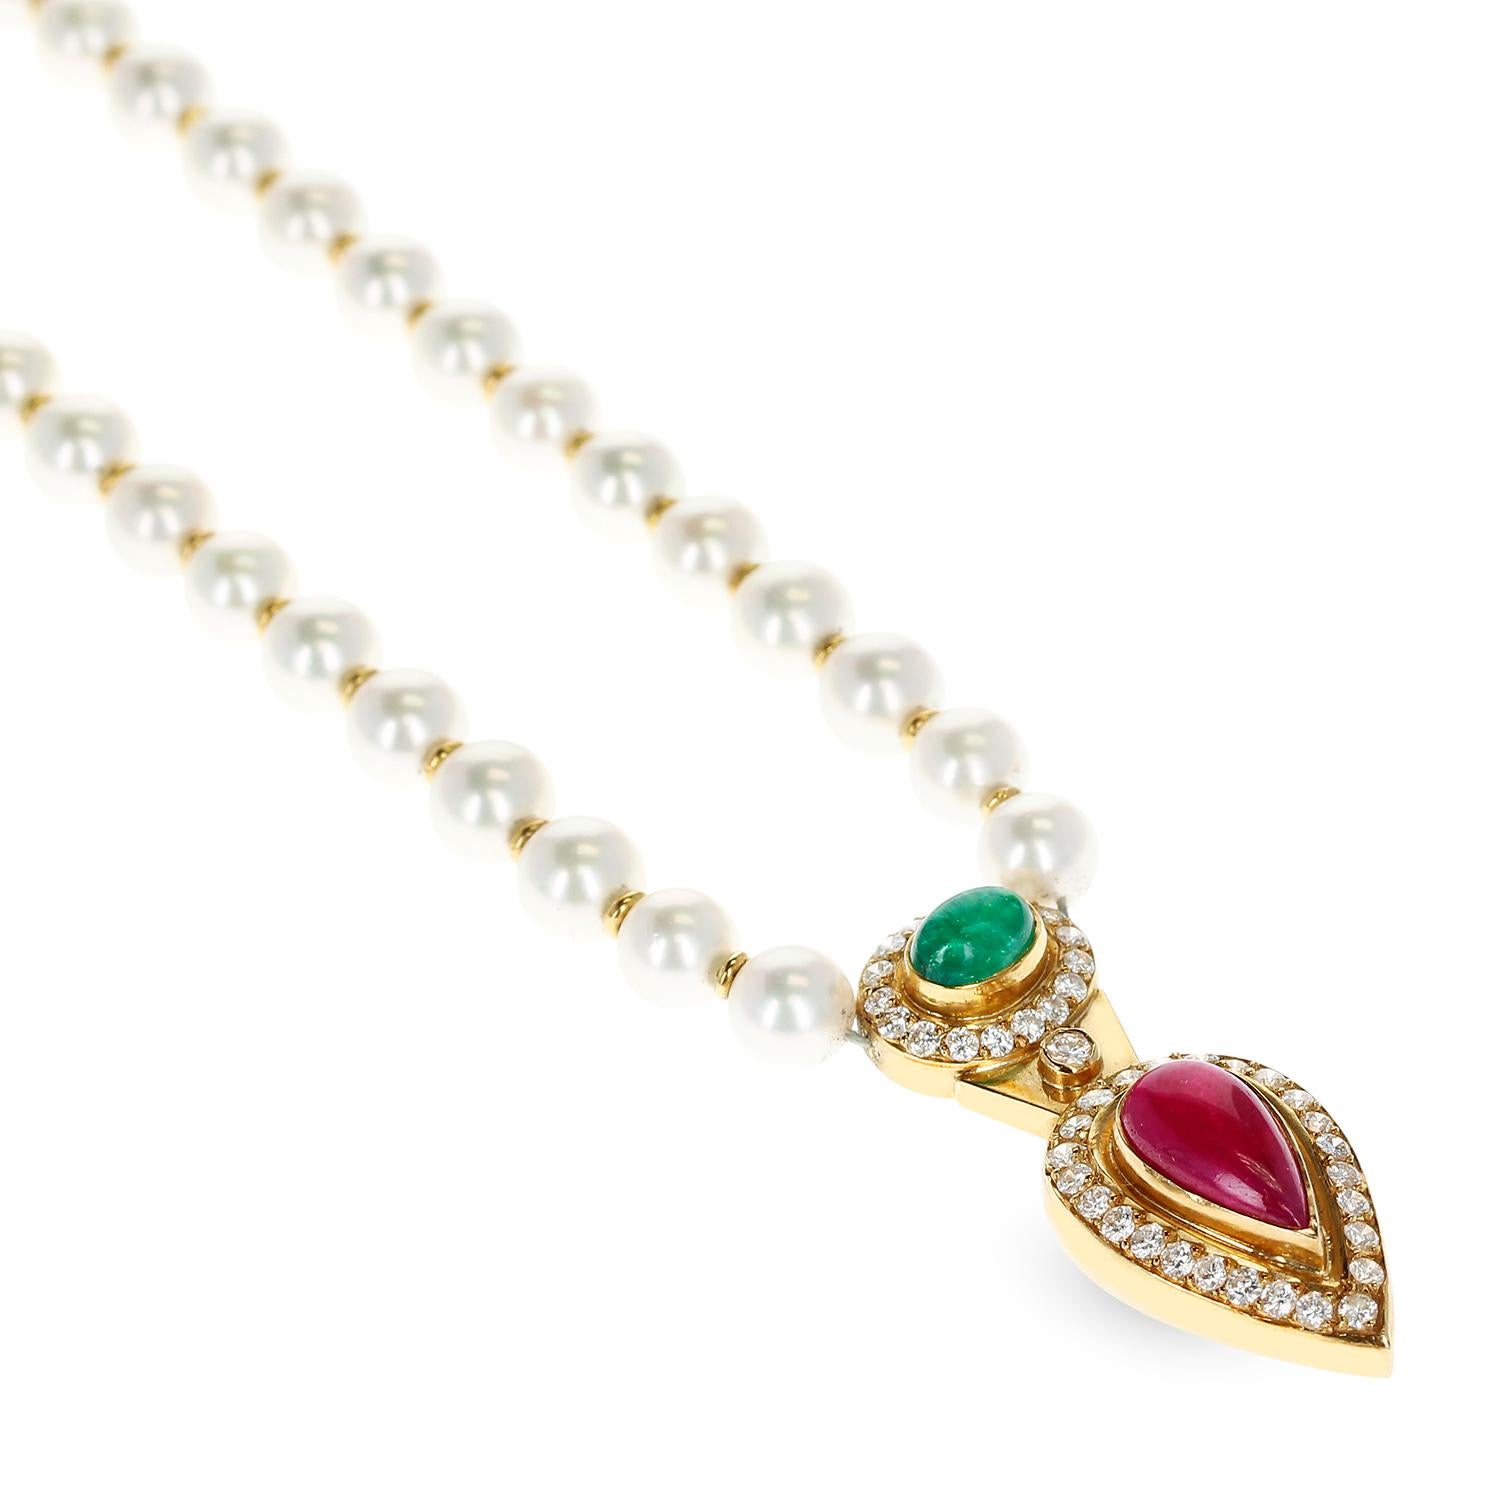 A Cultured Pearl Necklace with an Oval Emerald Cabochon, a Pear-Shape Ruby Cabochon, and Diamonds on the pendant and on the clasp as well. Each bead has a gold spacer in between. The length of the entire necklace from the clasp to the bottom of the